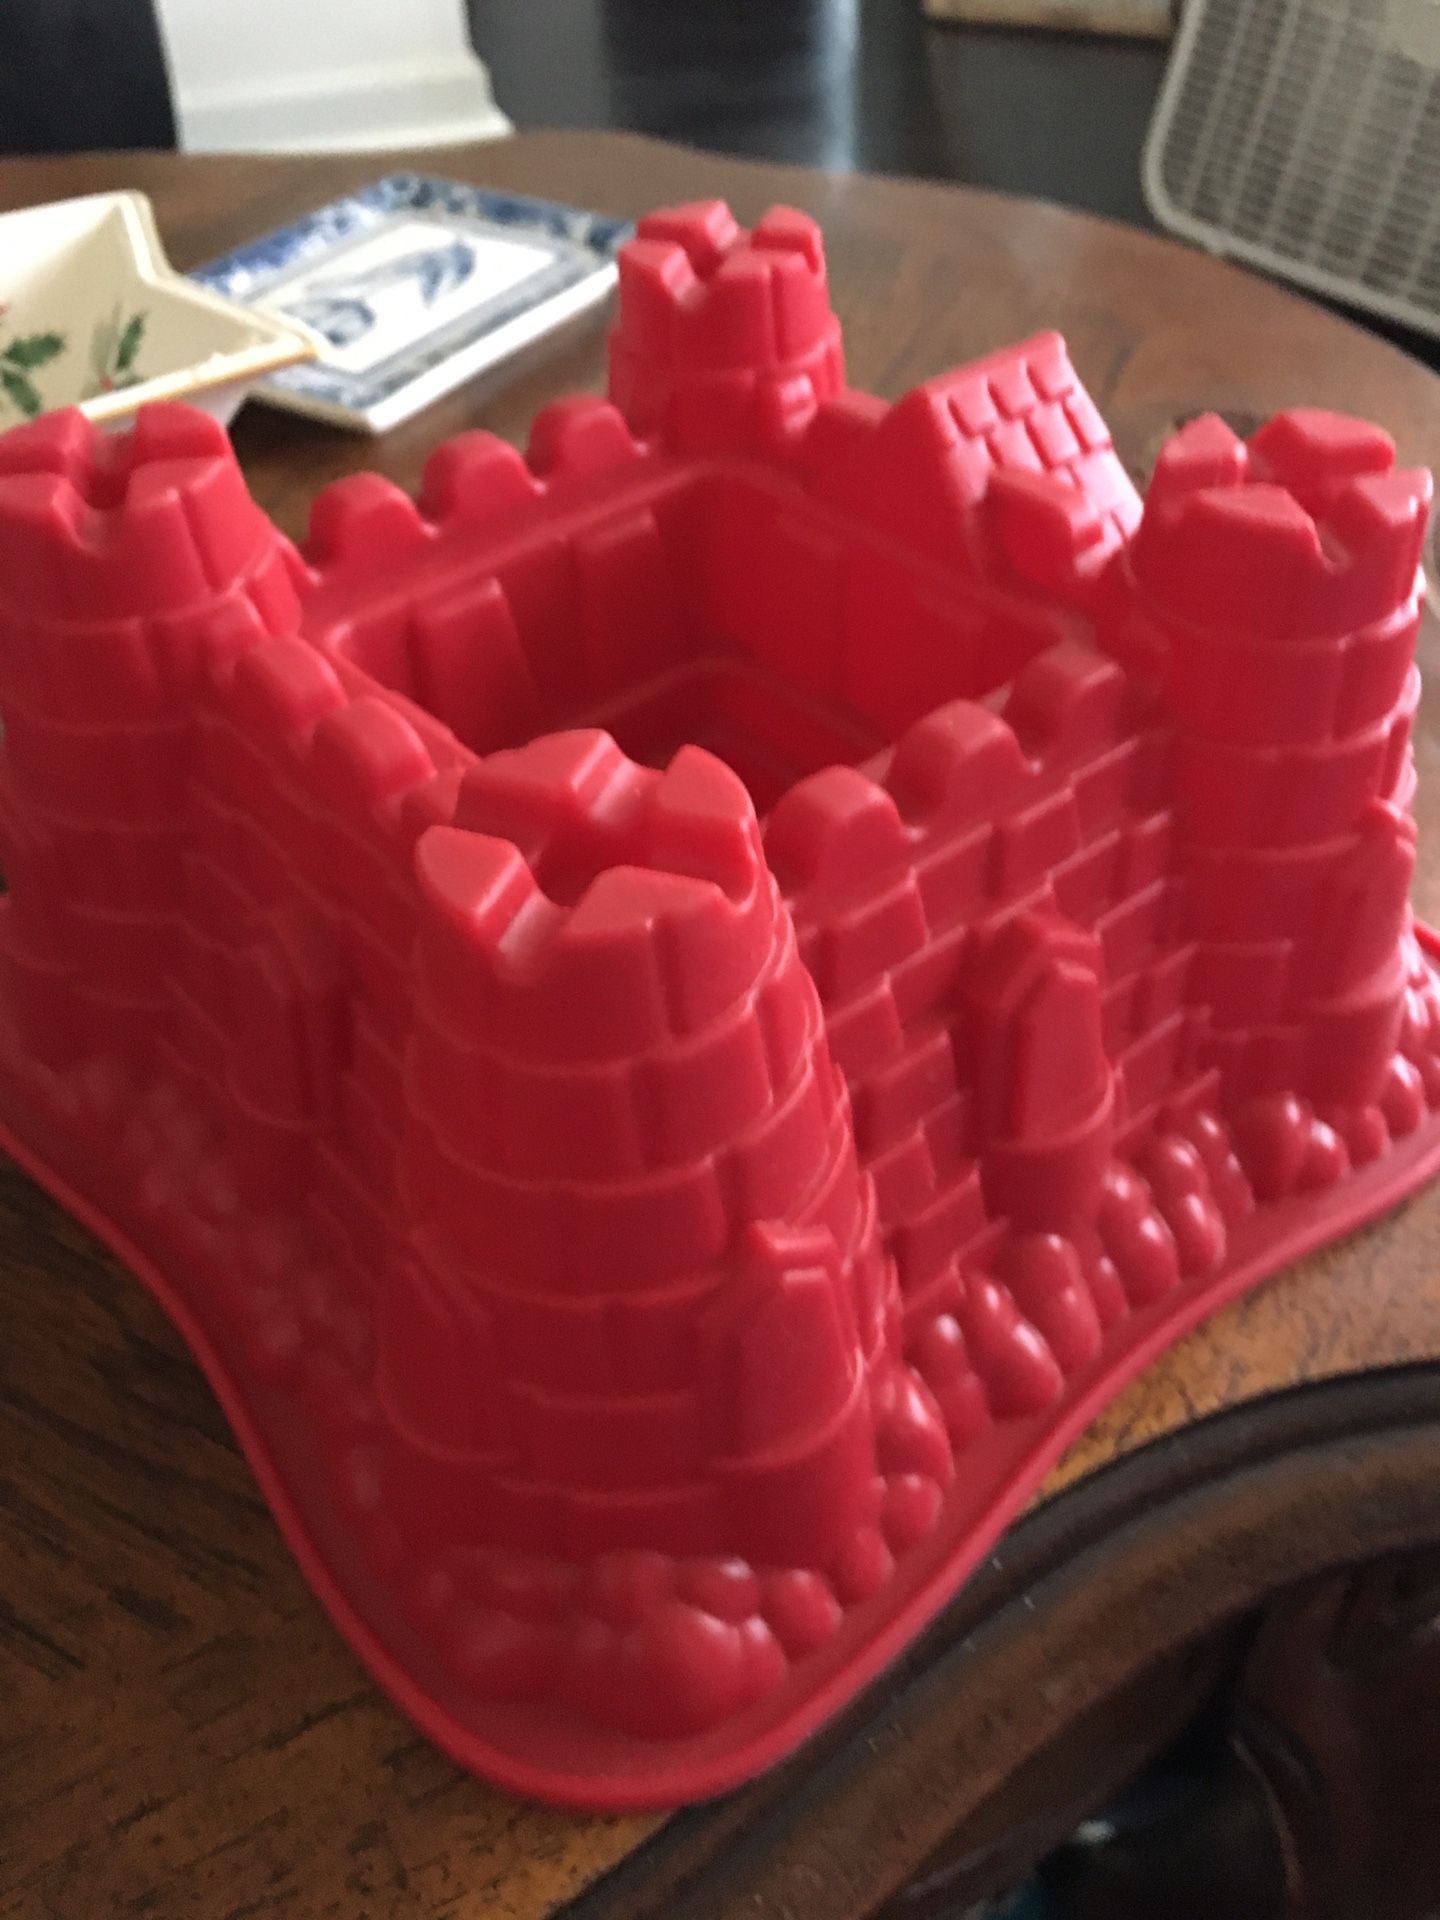 Silicone Castle Cake Mold   For Dad The King Of The Castle? New 